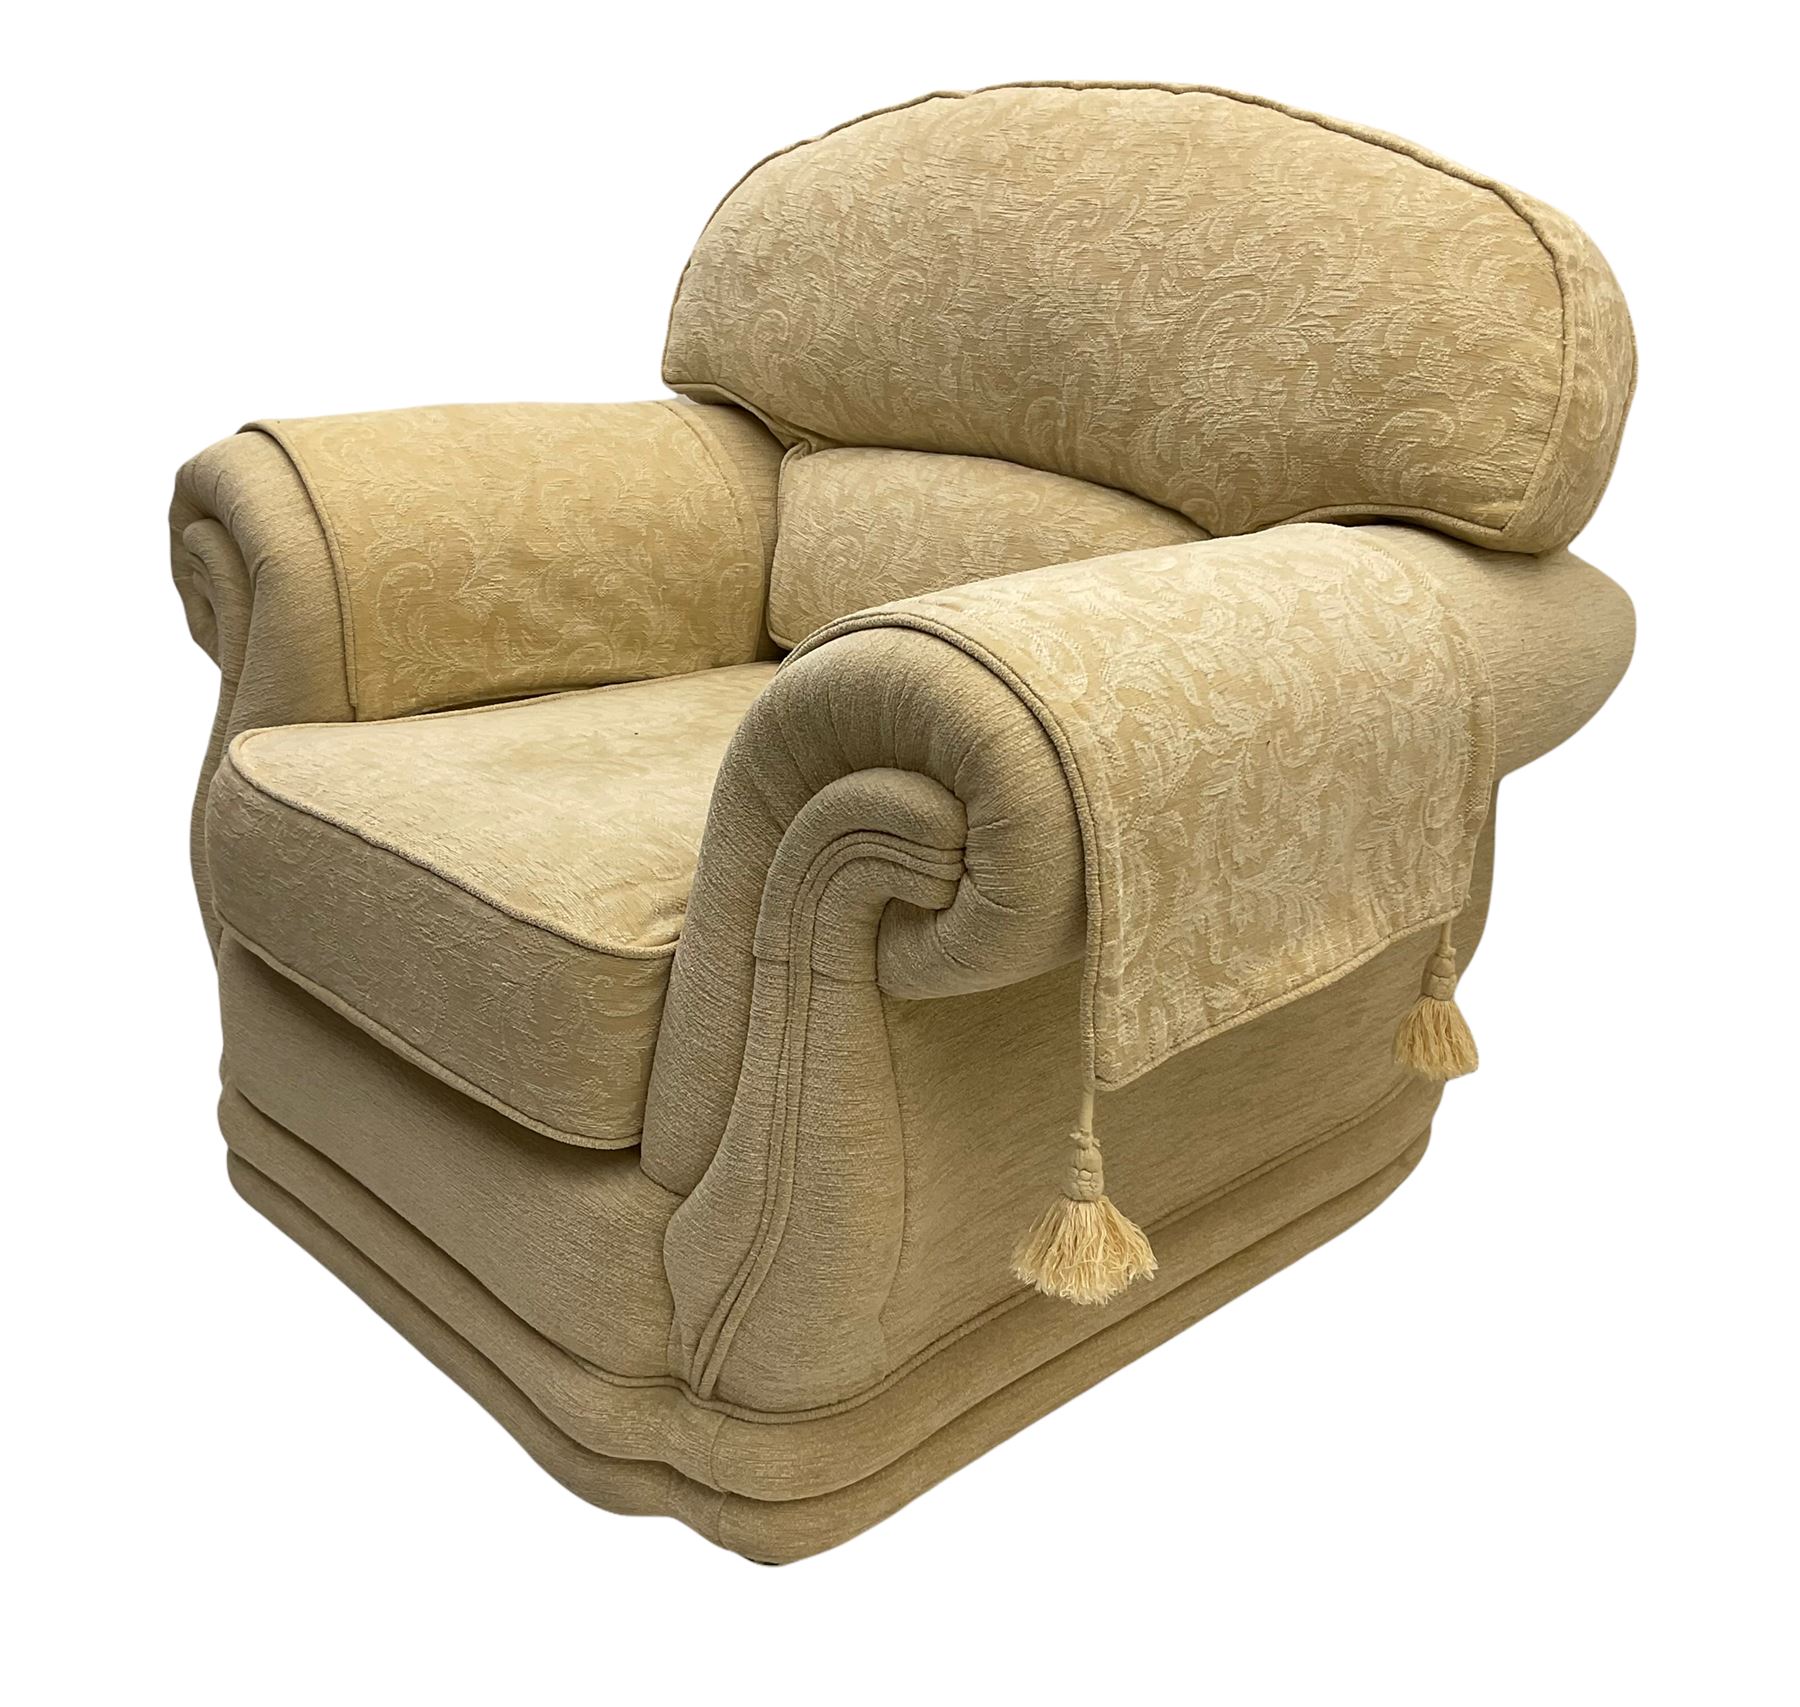 Three piece lounge suite upholstered in beige plain and embossed fabric - Image 10 of 10